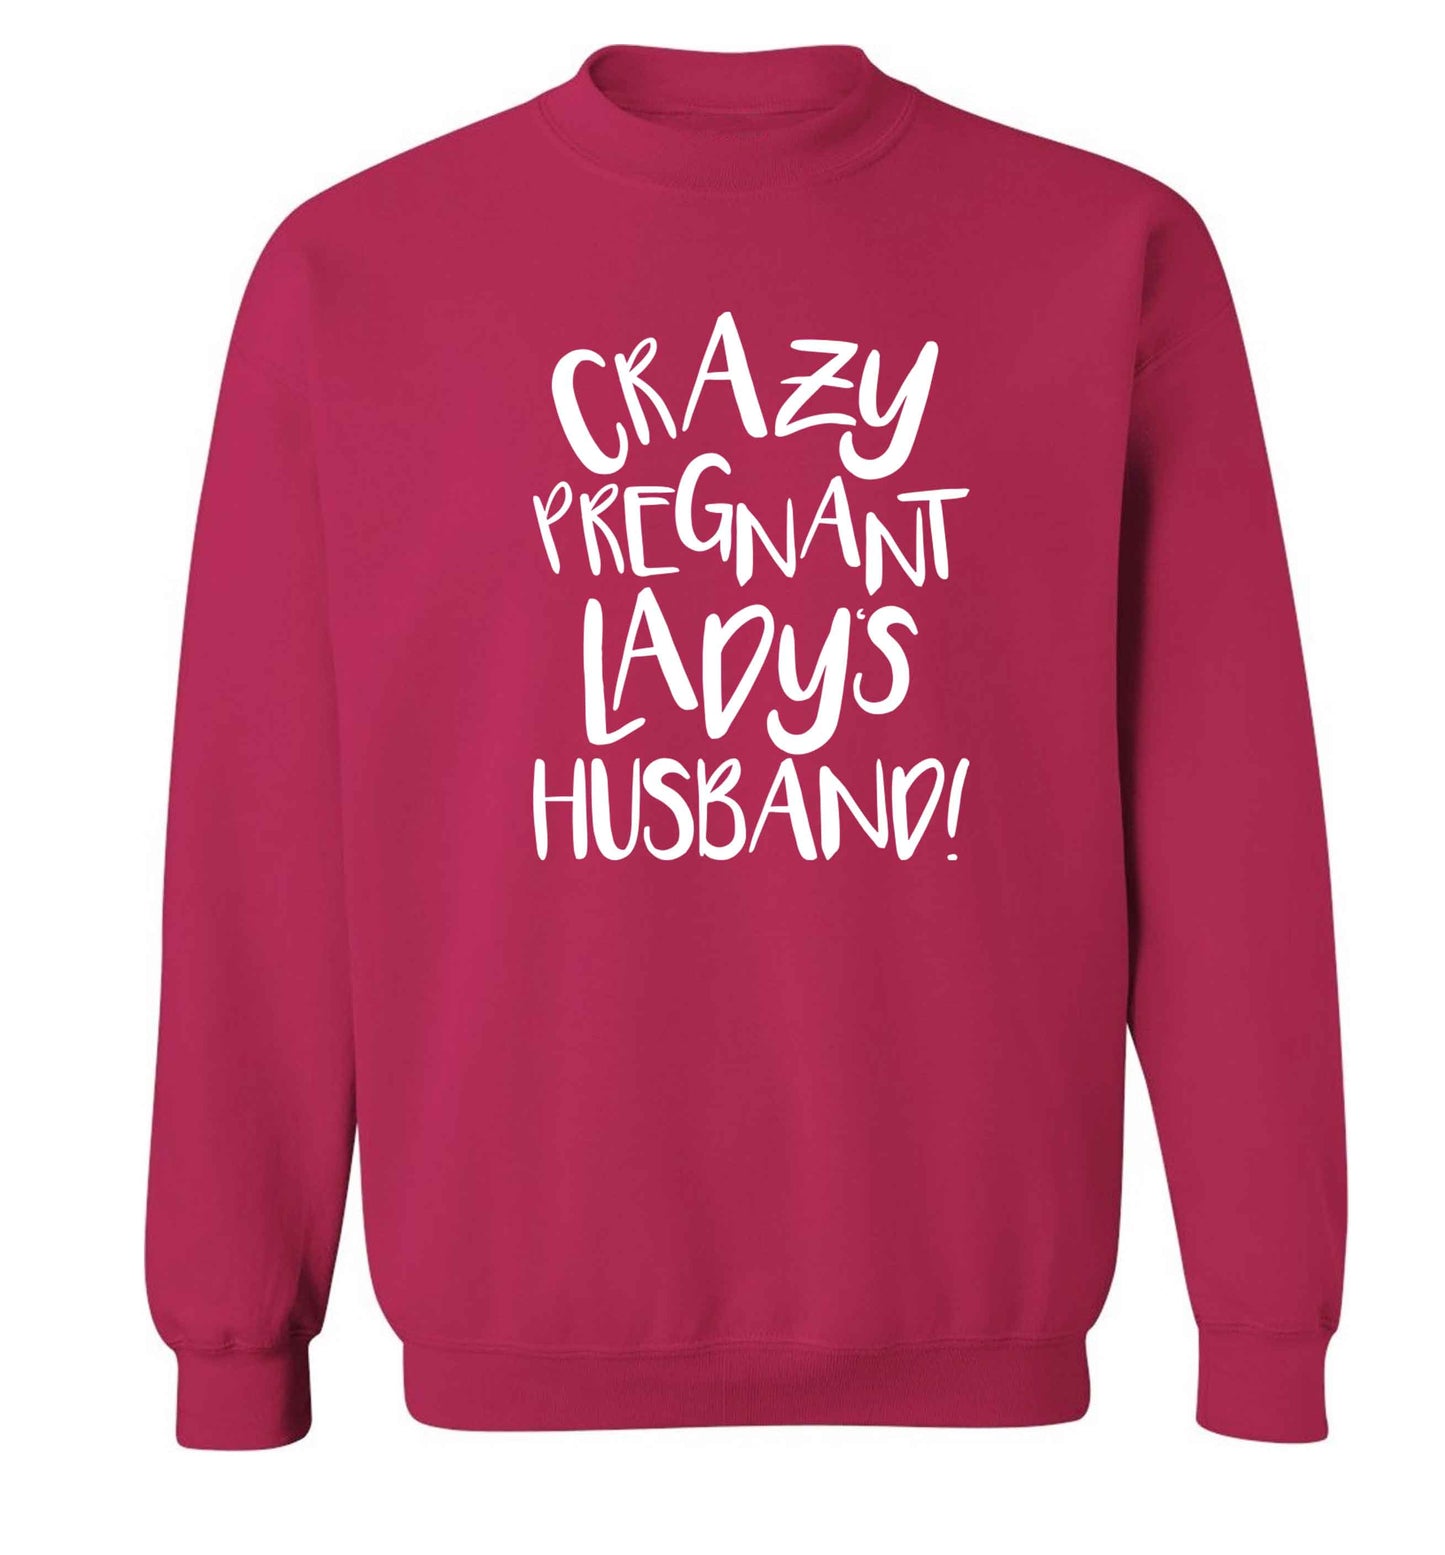 Crazy pregnant lady's husband Adult's unisex pink Sweater 2XL